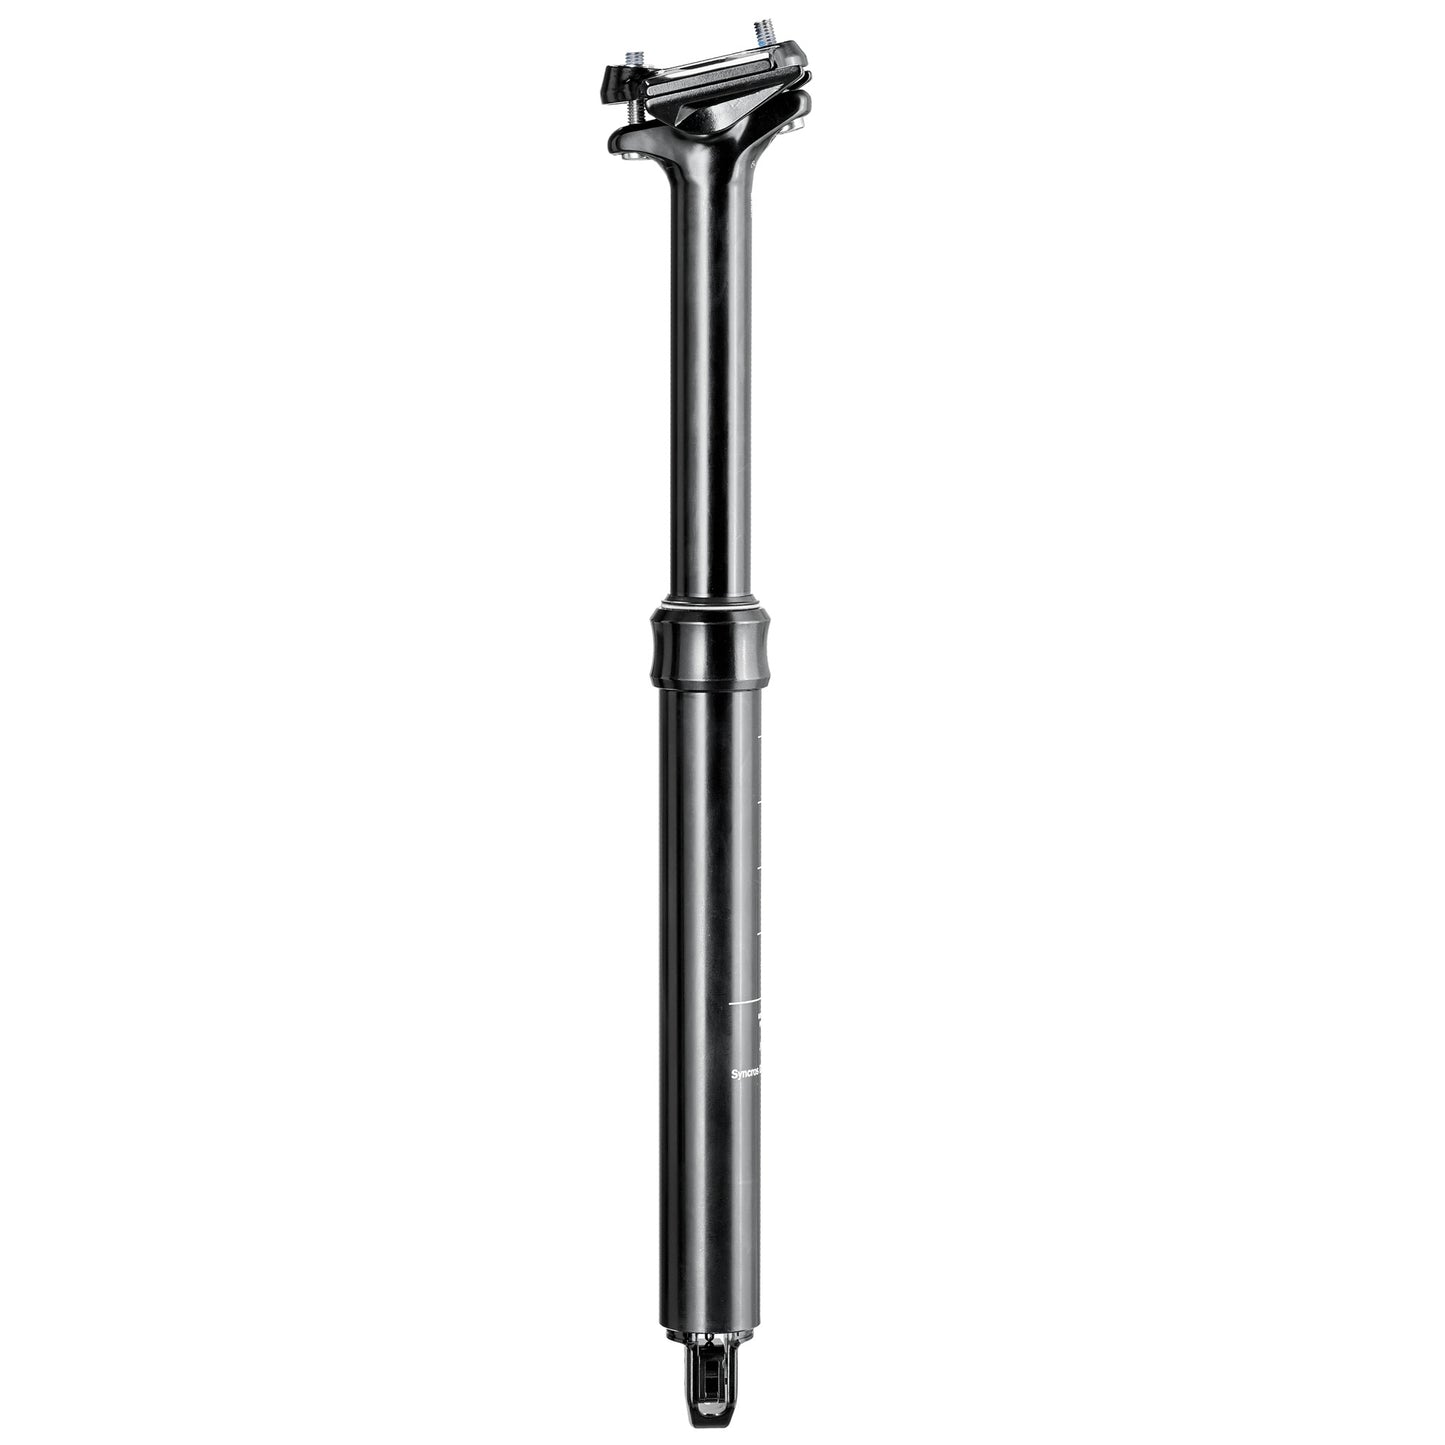 Syncros Seatpost Duncan Dropper 2.0 125mm